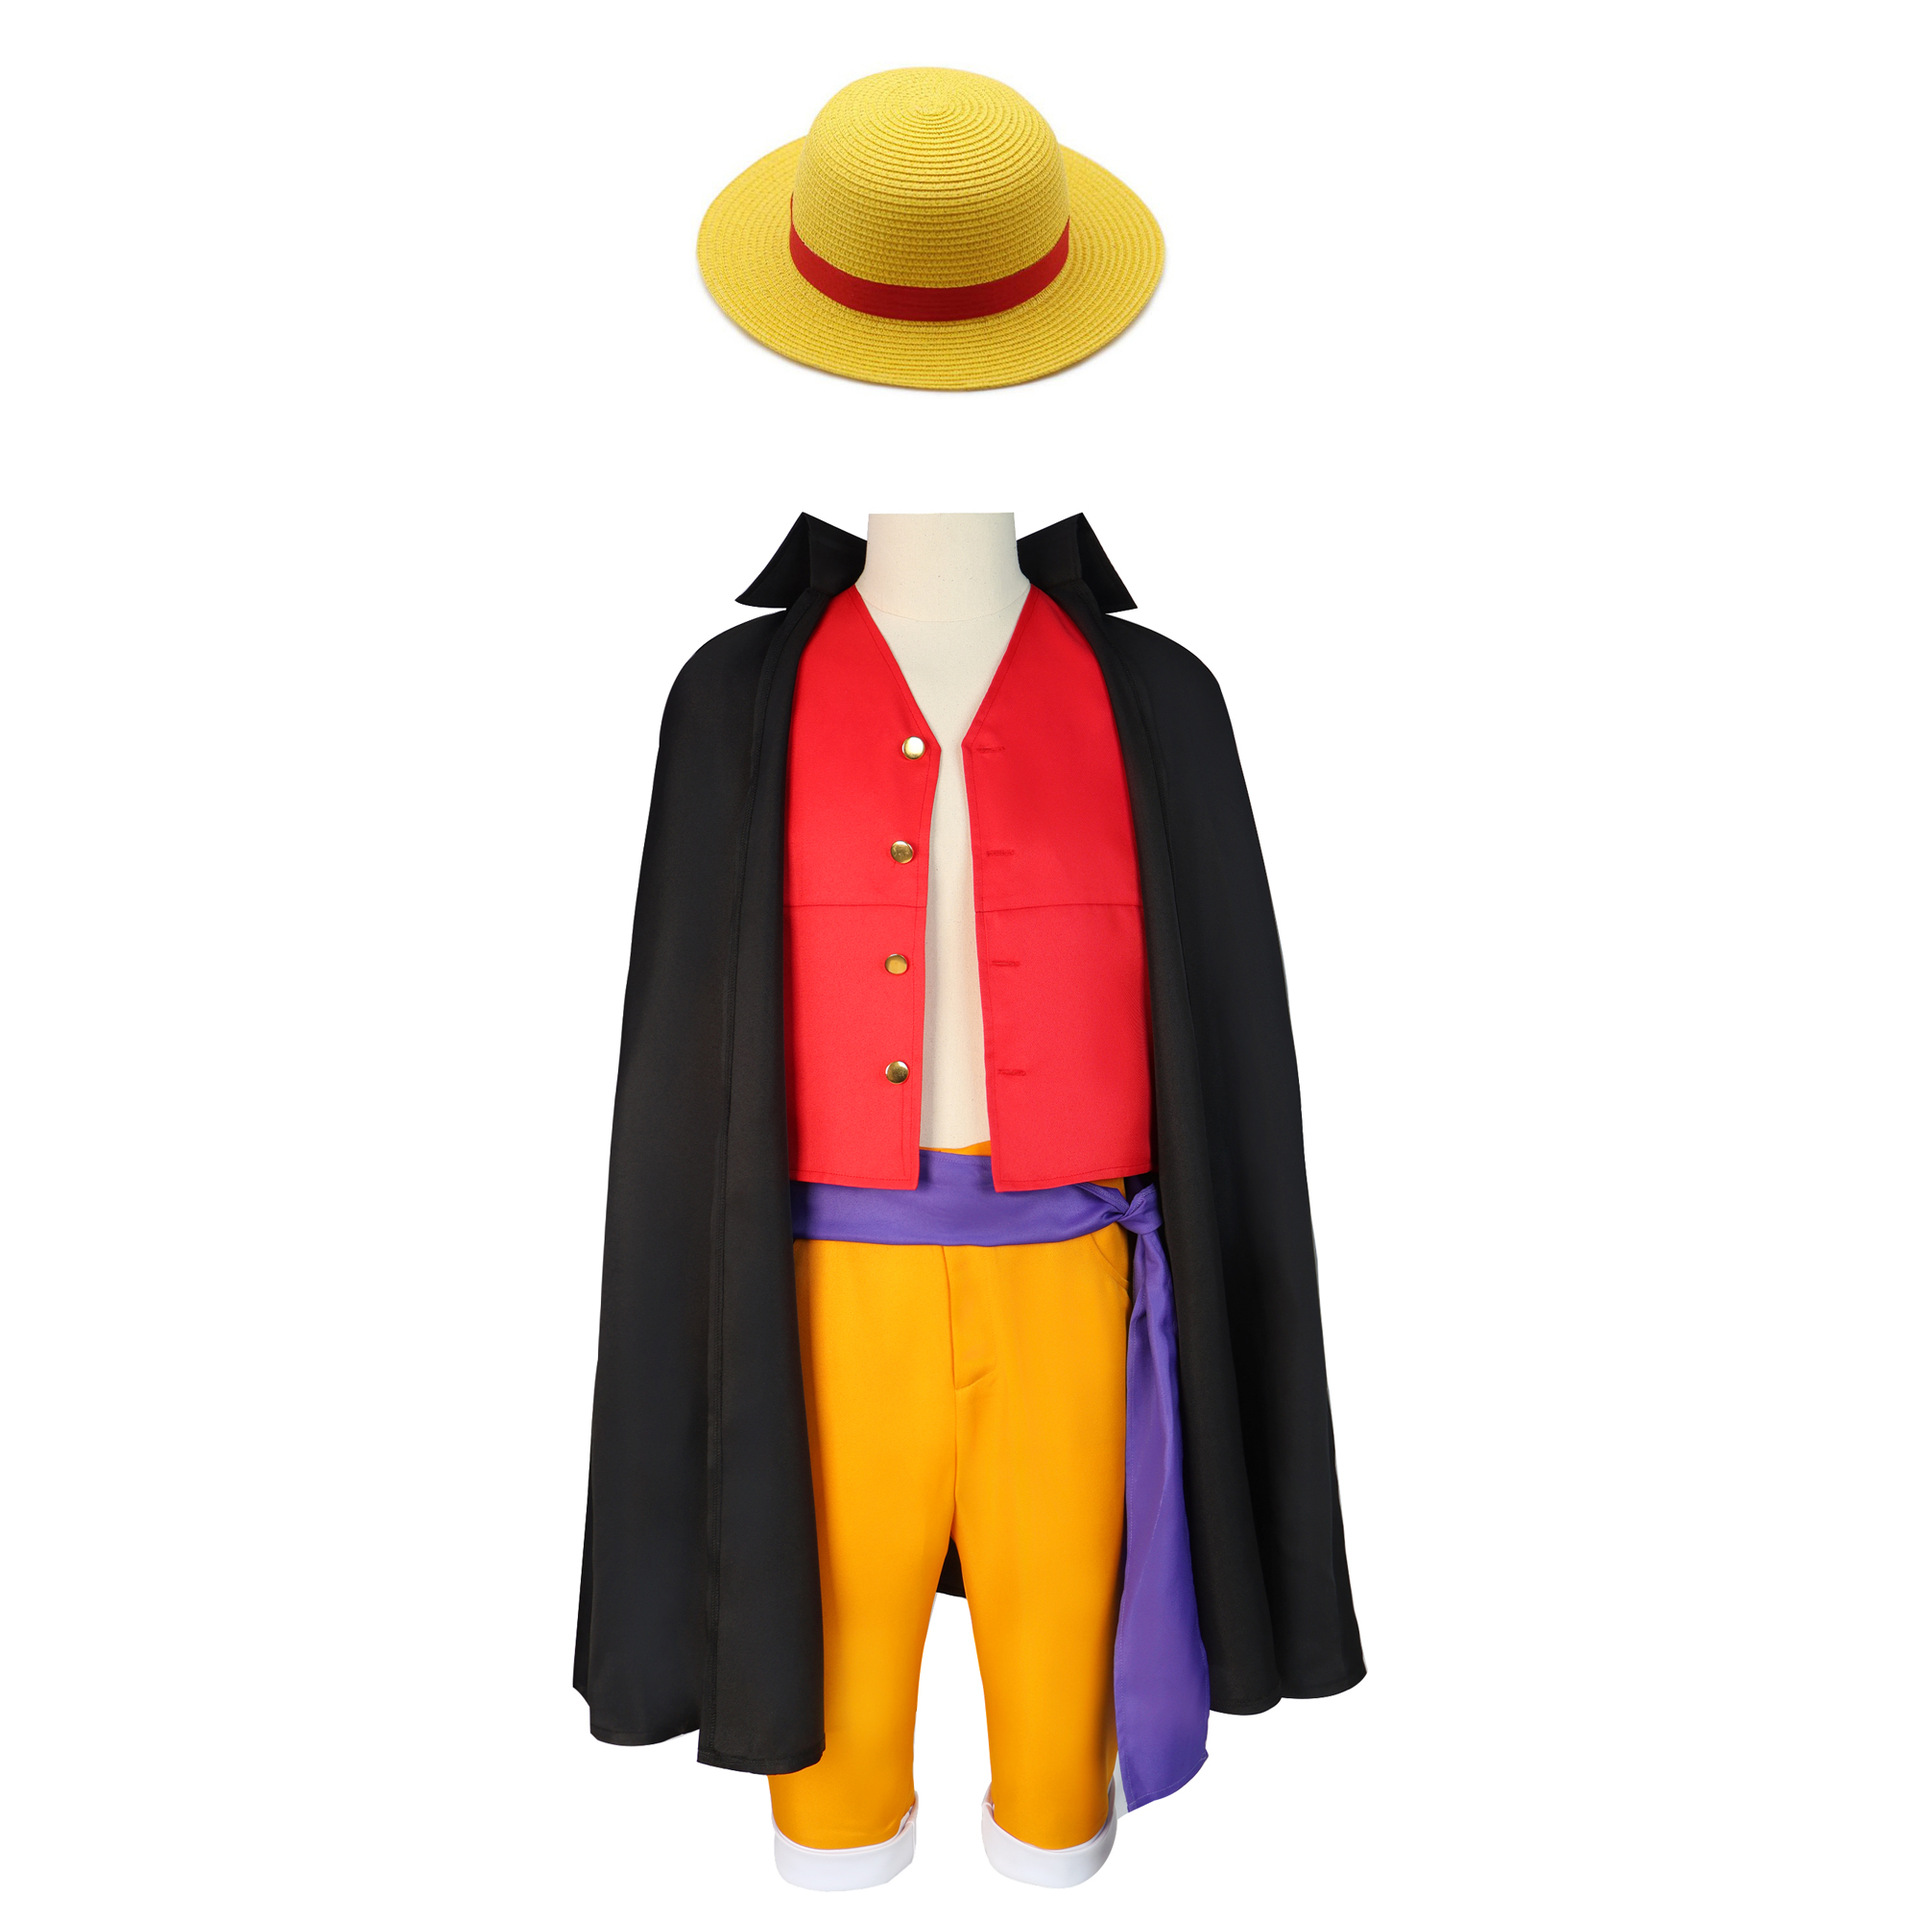 One Piece Luffy cos costume Wano Country Onigashima Chapter two years later the second generation Straw Hat Luffy cosplay costume